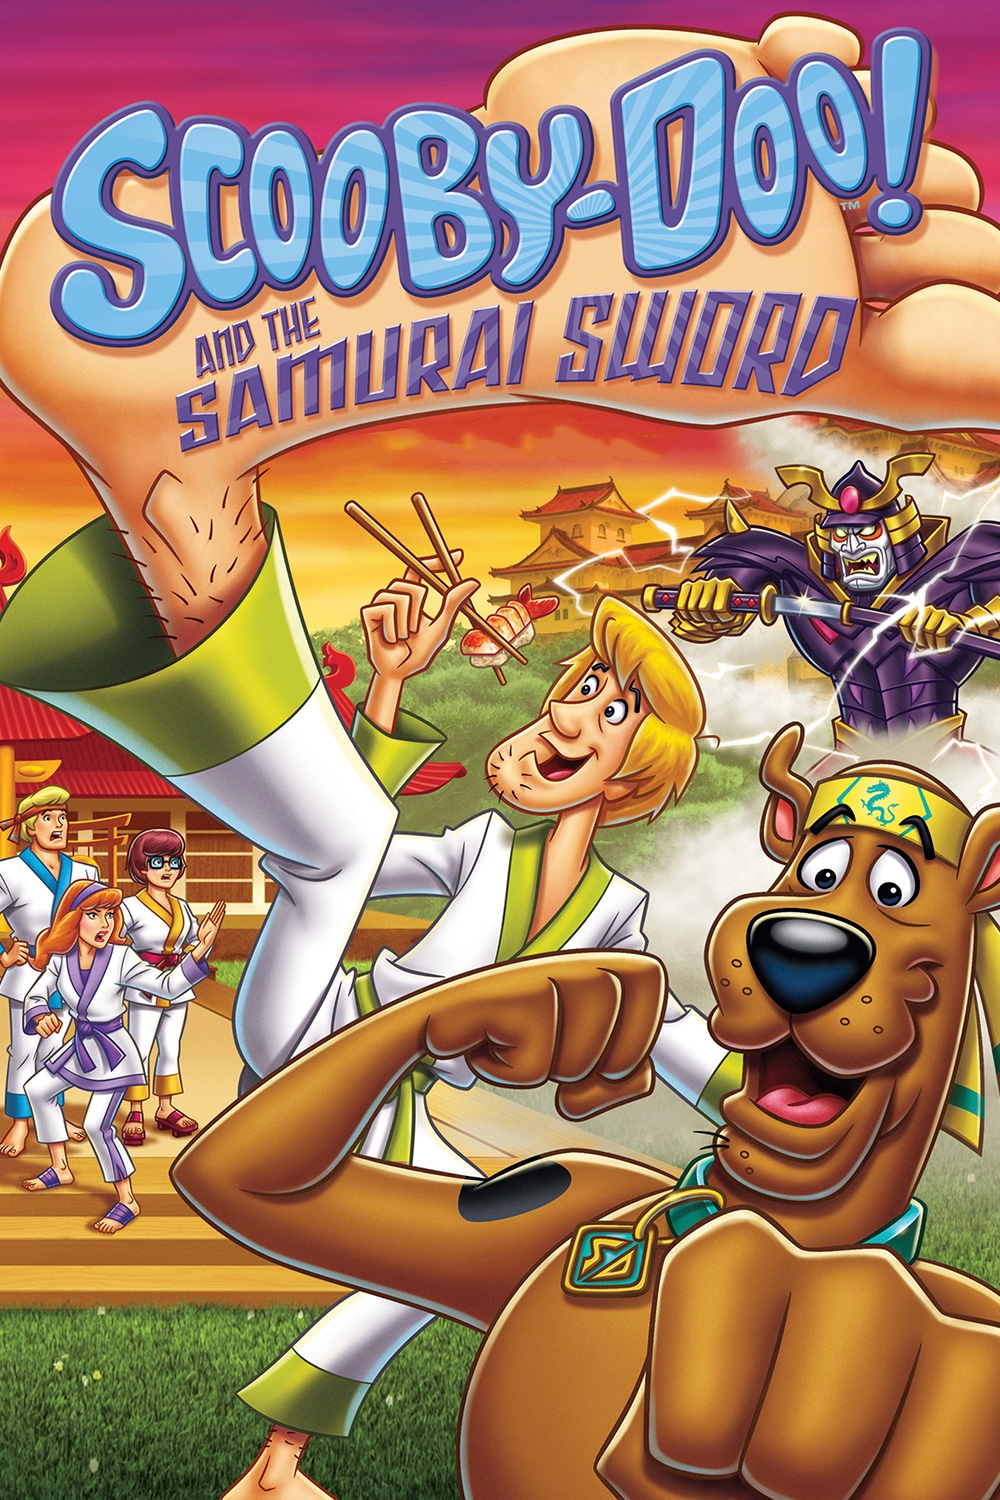 david vessel recommends scooby doo movie downloads pic